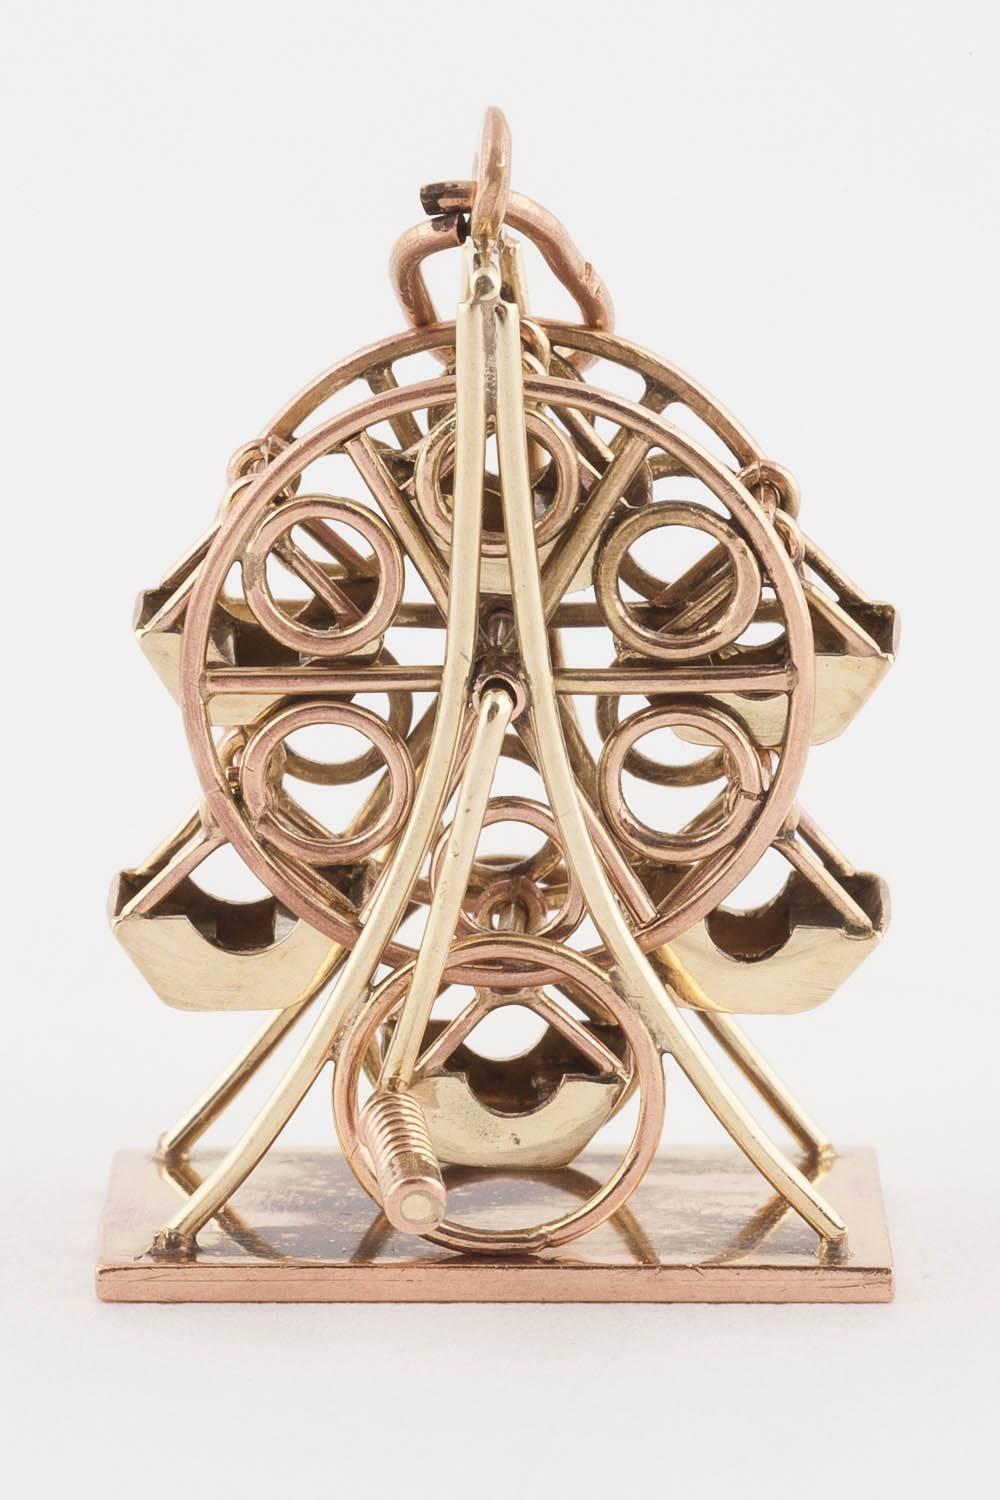 Reminiscent of Vienna’s Riesenrad in The Third Man (1949) this two color gold Ferris wheel miniature, from the 1950s, revolves by way of a crank, its chairs swinging as it turns around, on a flat base, it may be worn as a pendant or simply admired